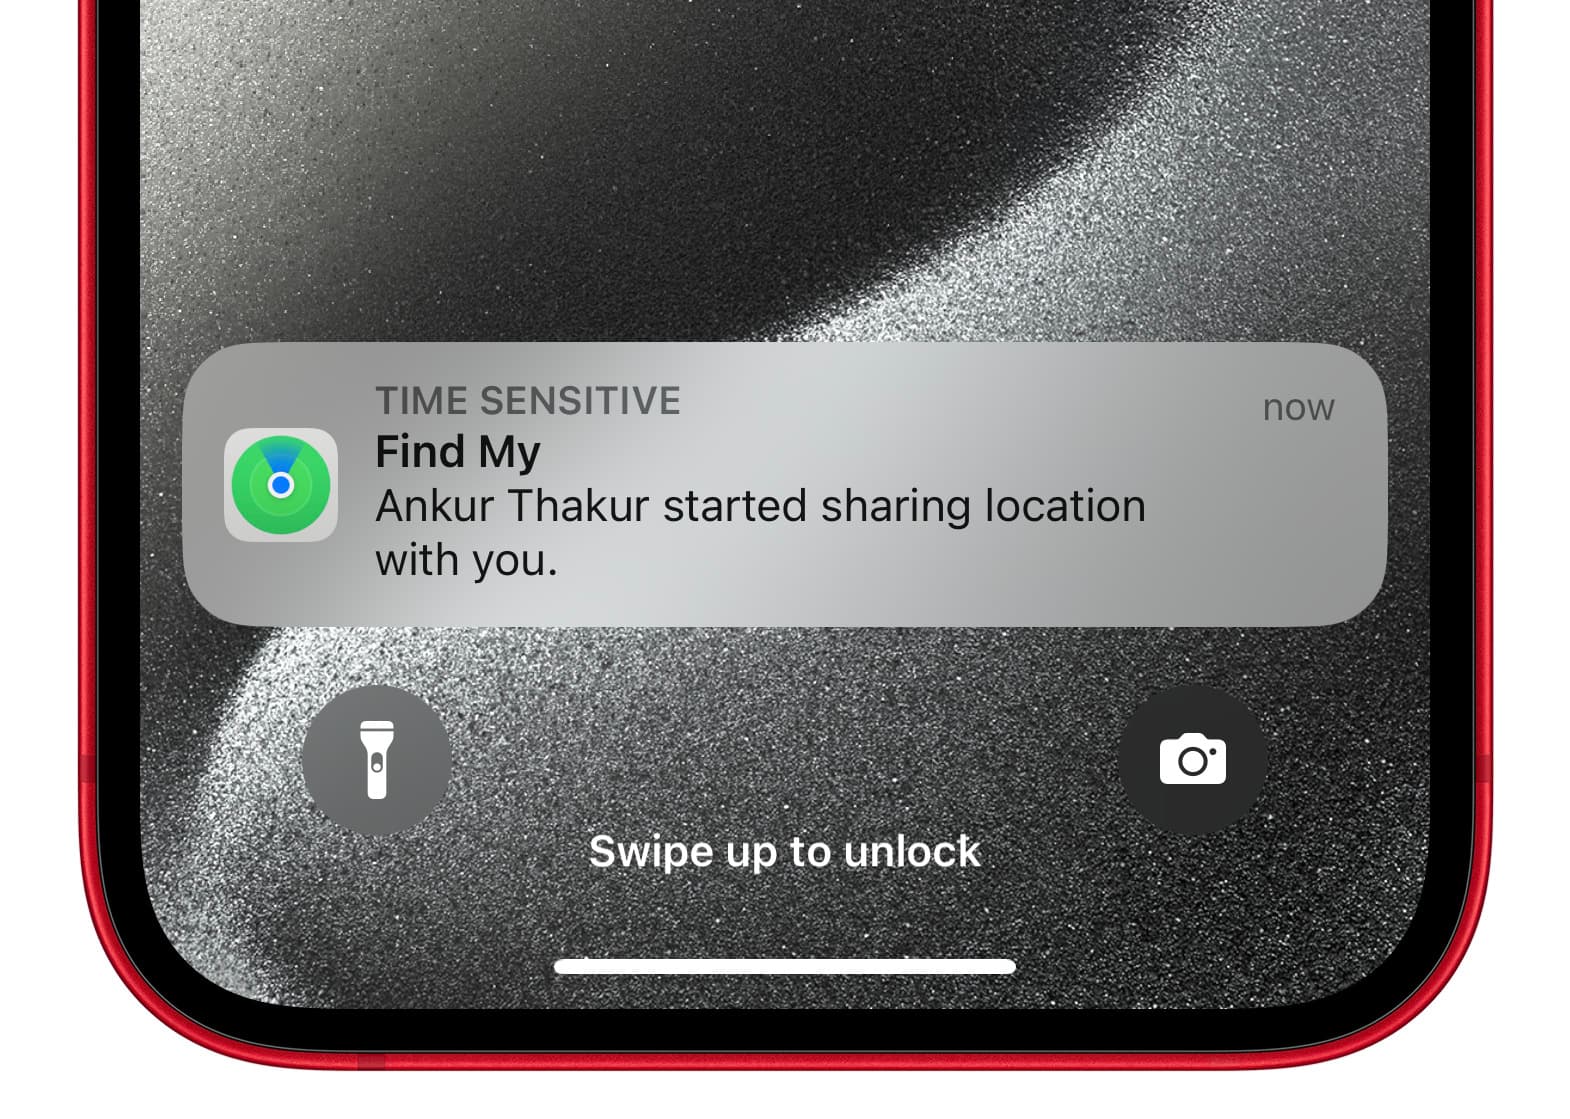 Find My person started sharing location with you notification on iPhone